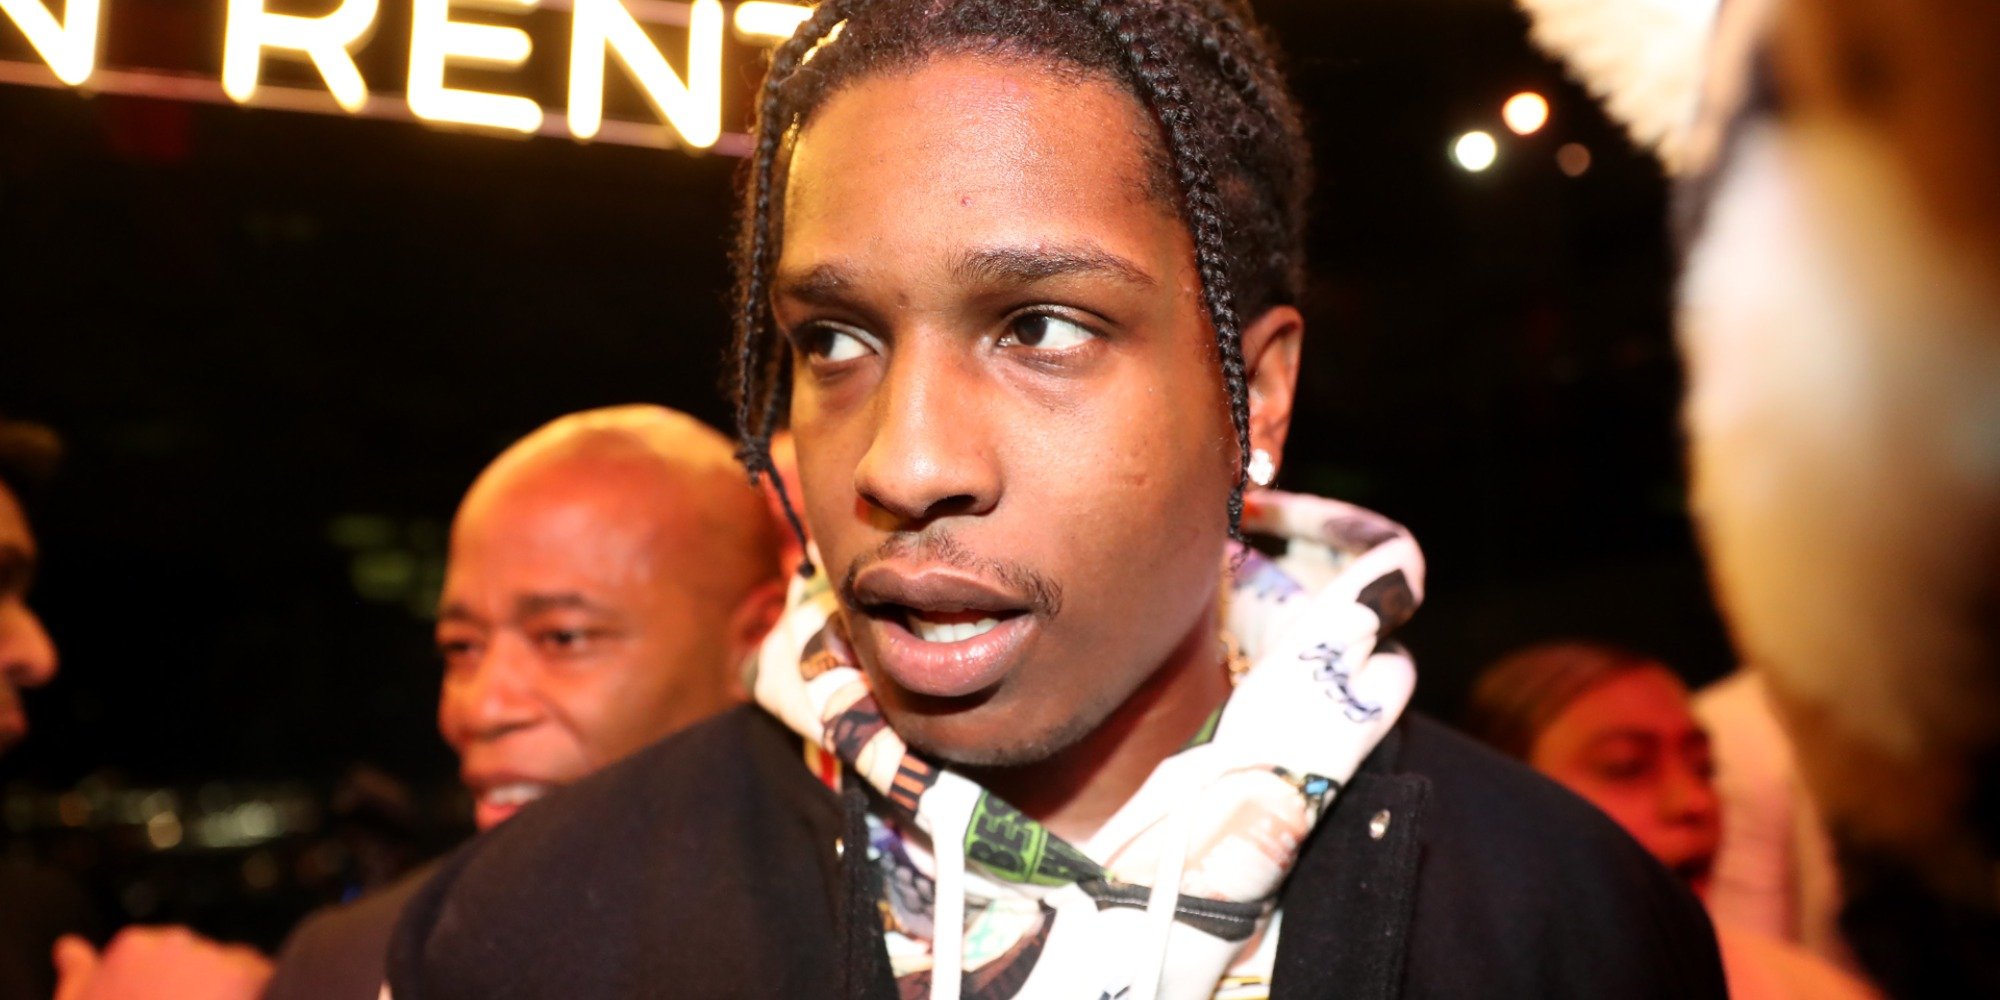 A$AP Rocky in a paparazzi photograph.